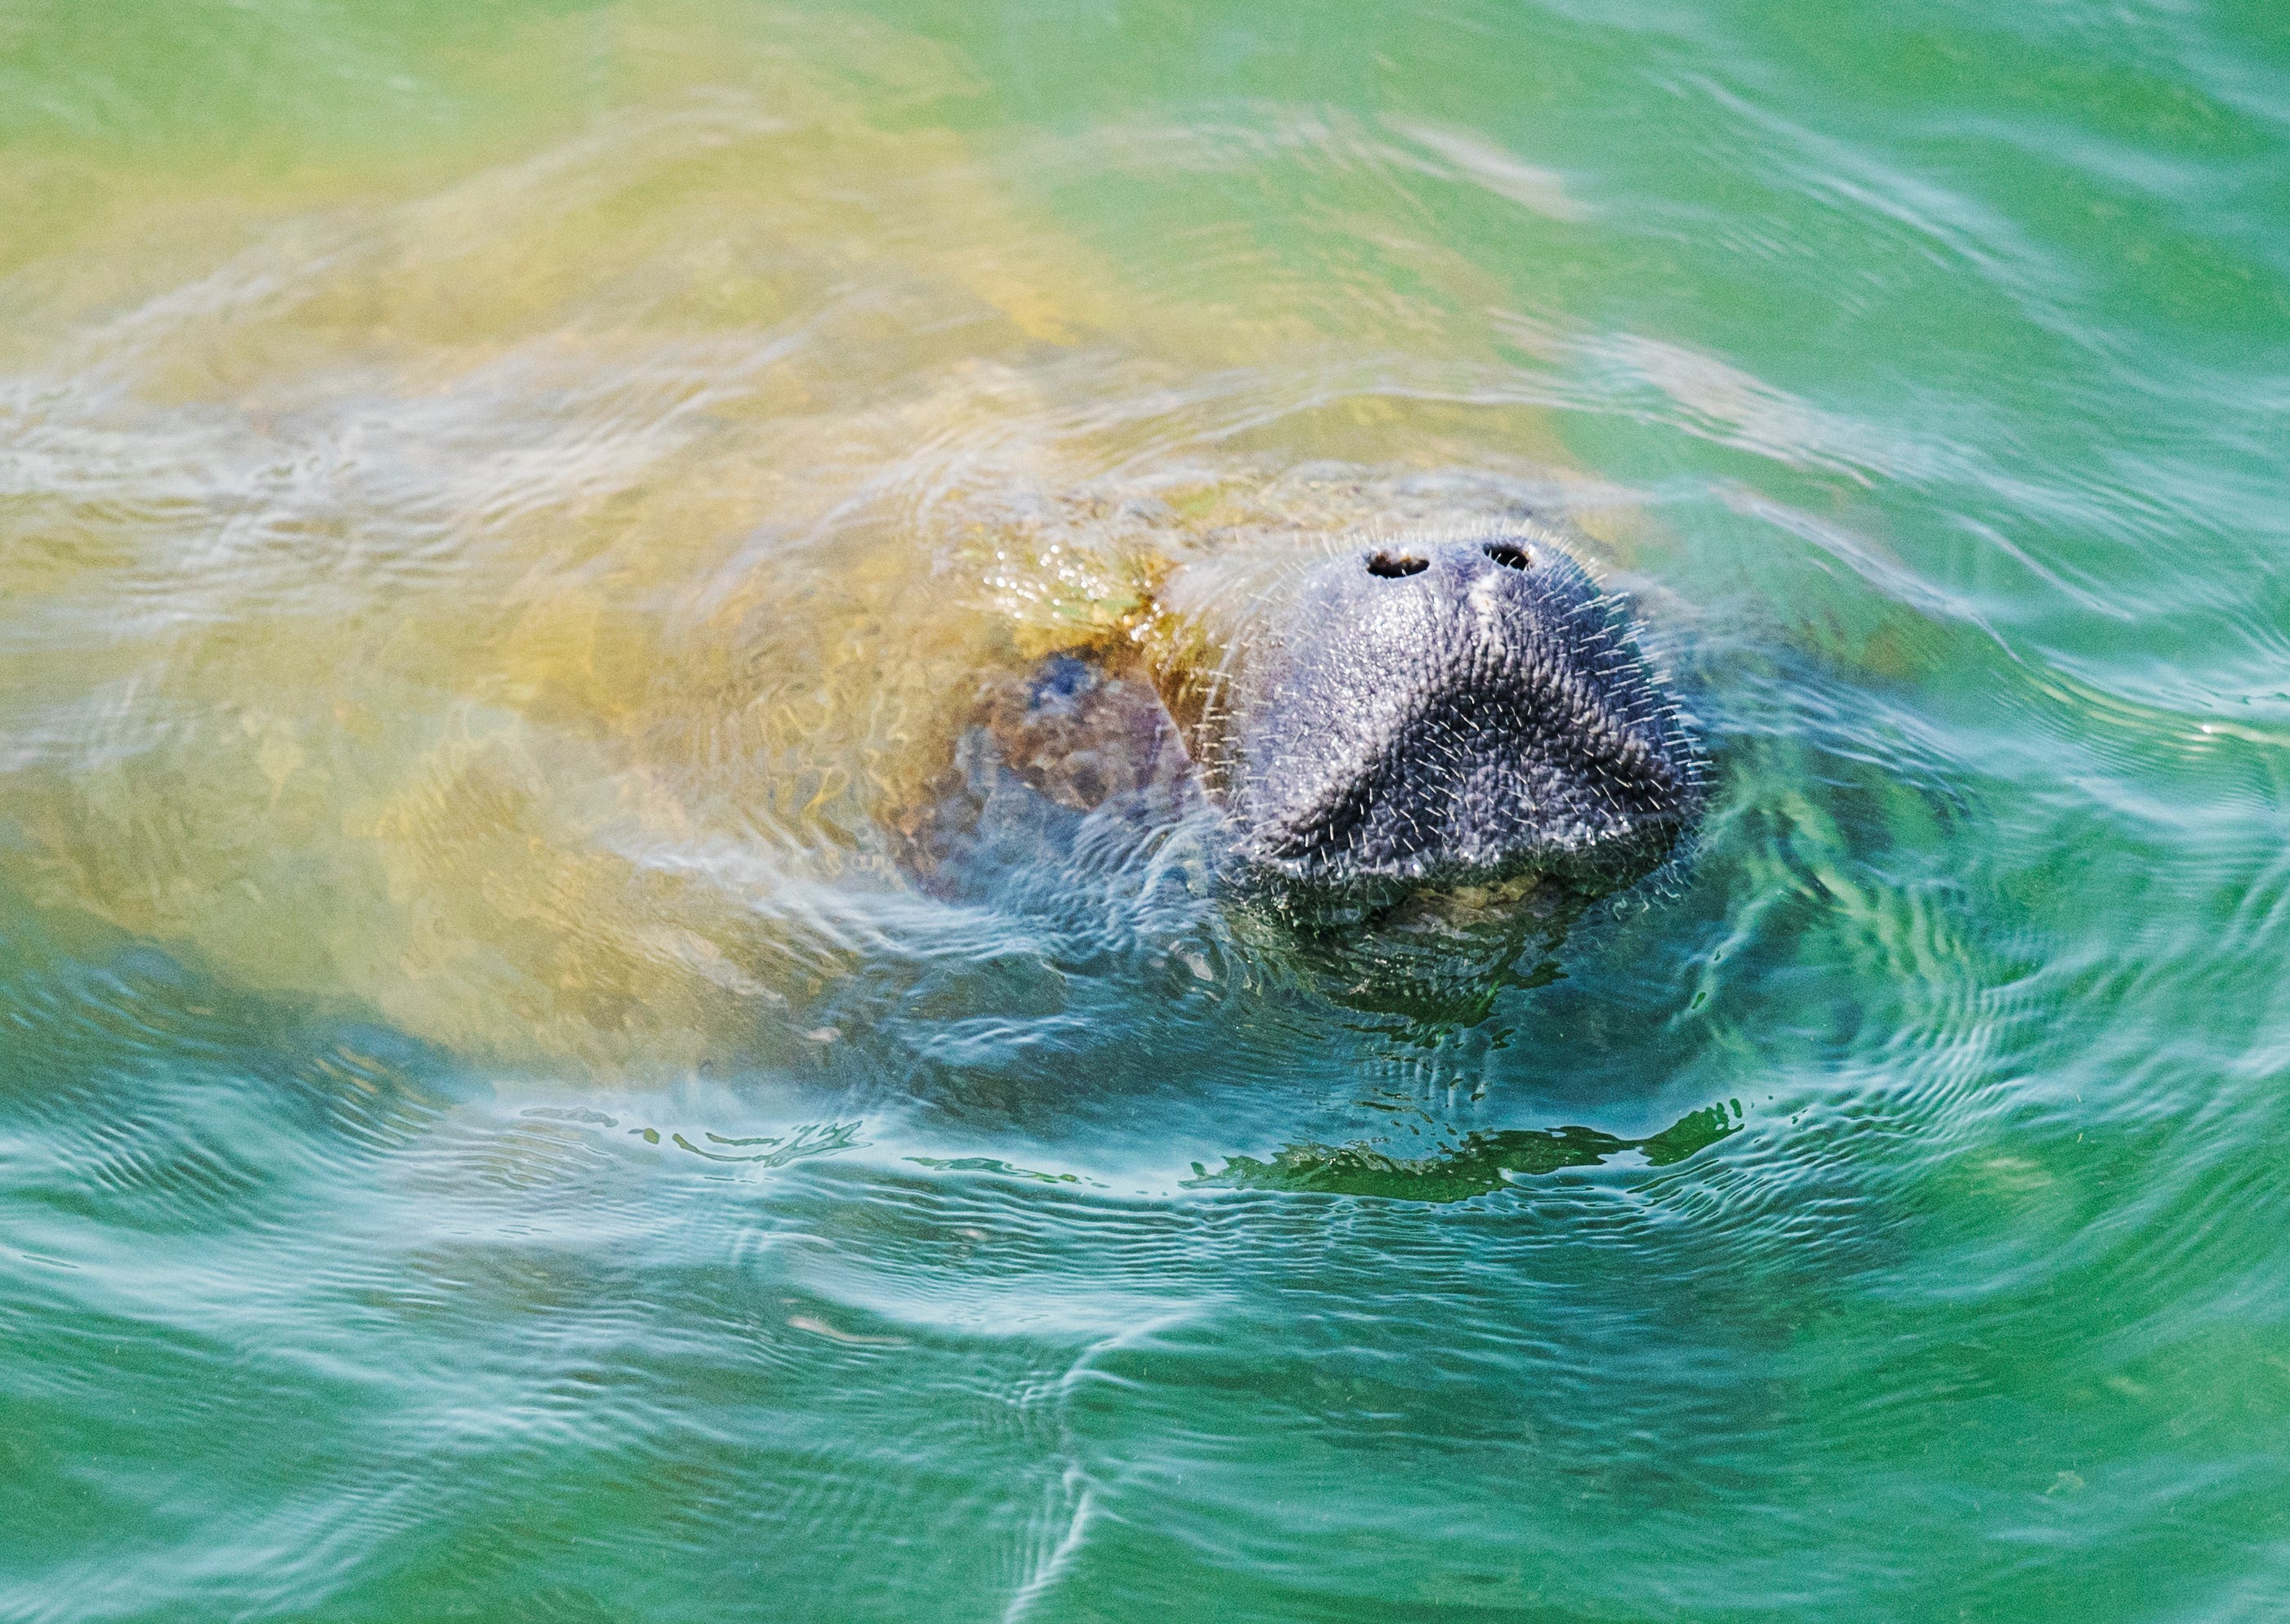 Slow Down for Manatees by Jim Arnosky